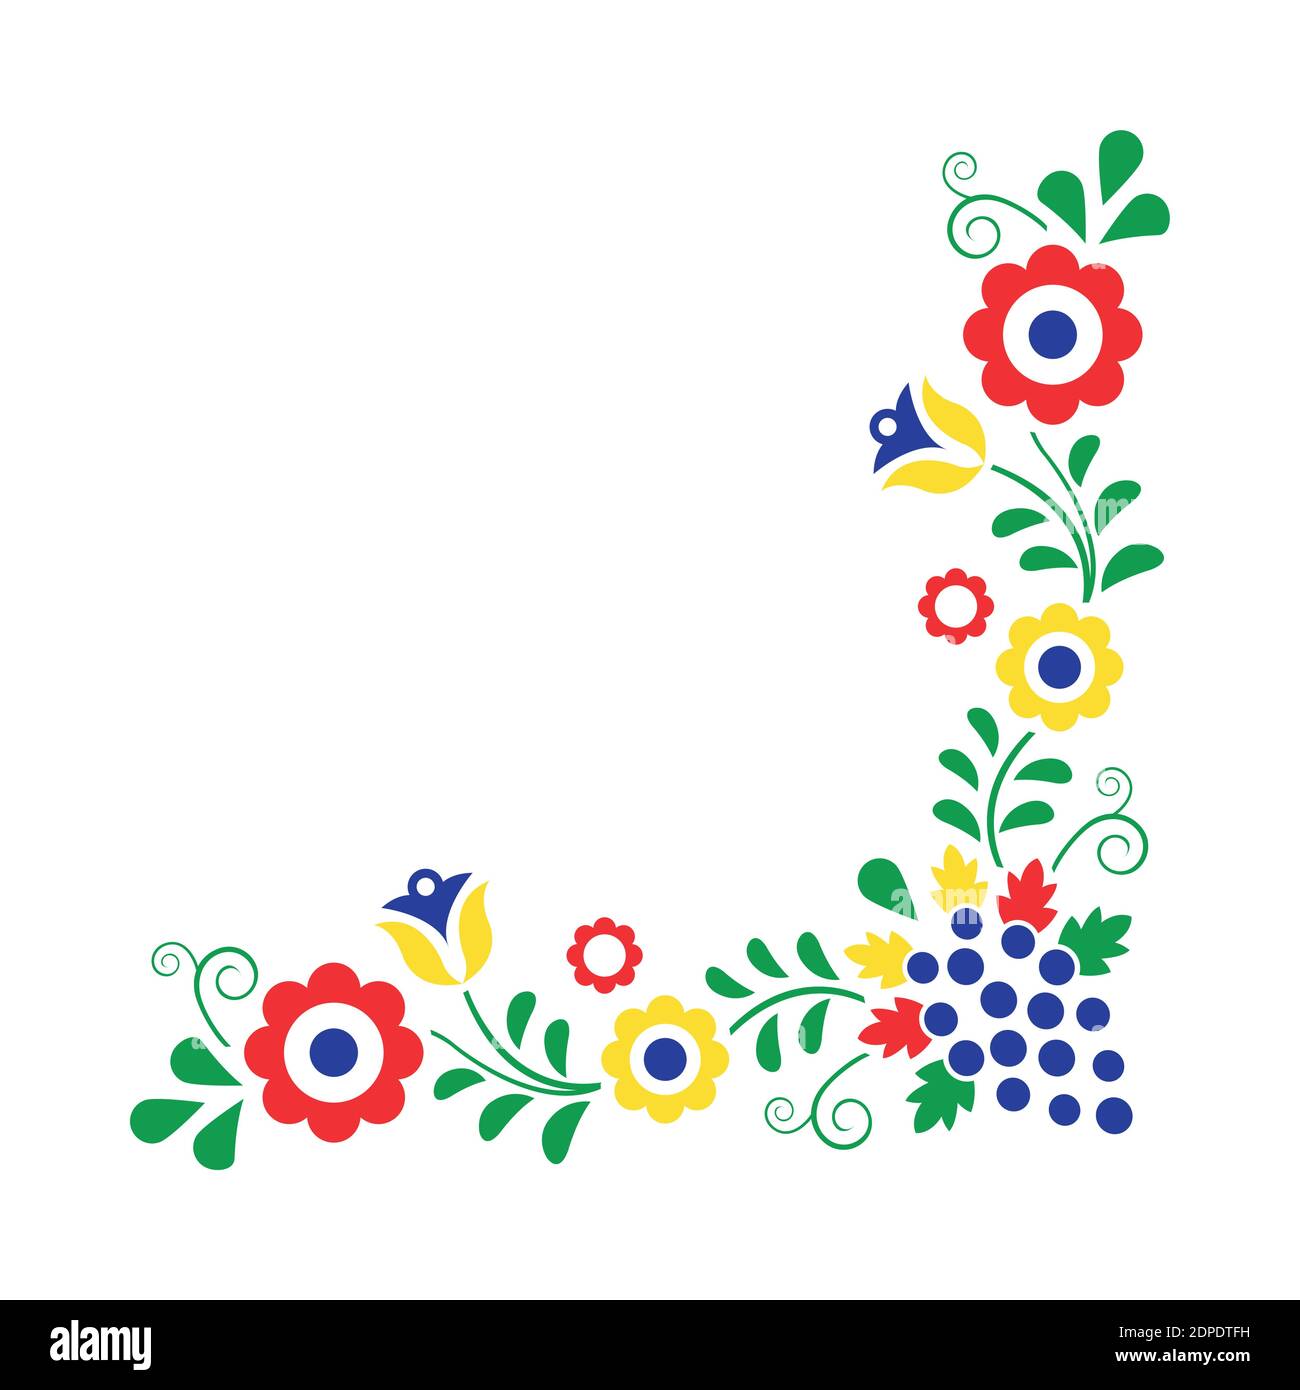 Colorful folklore ornament isolated on a white background, vector illustration Stock Vector